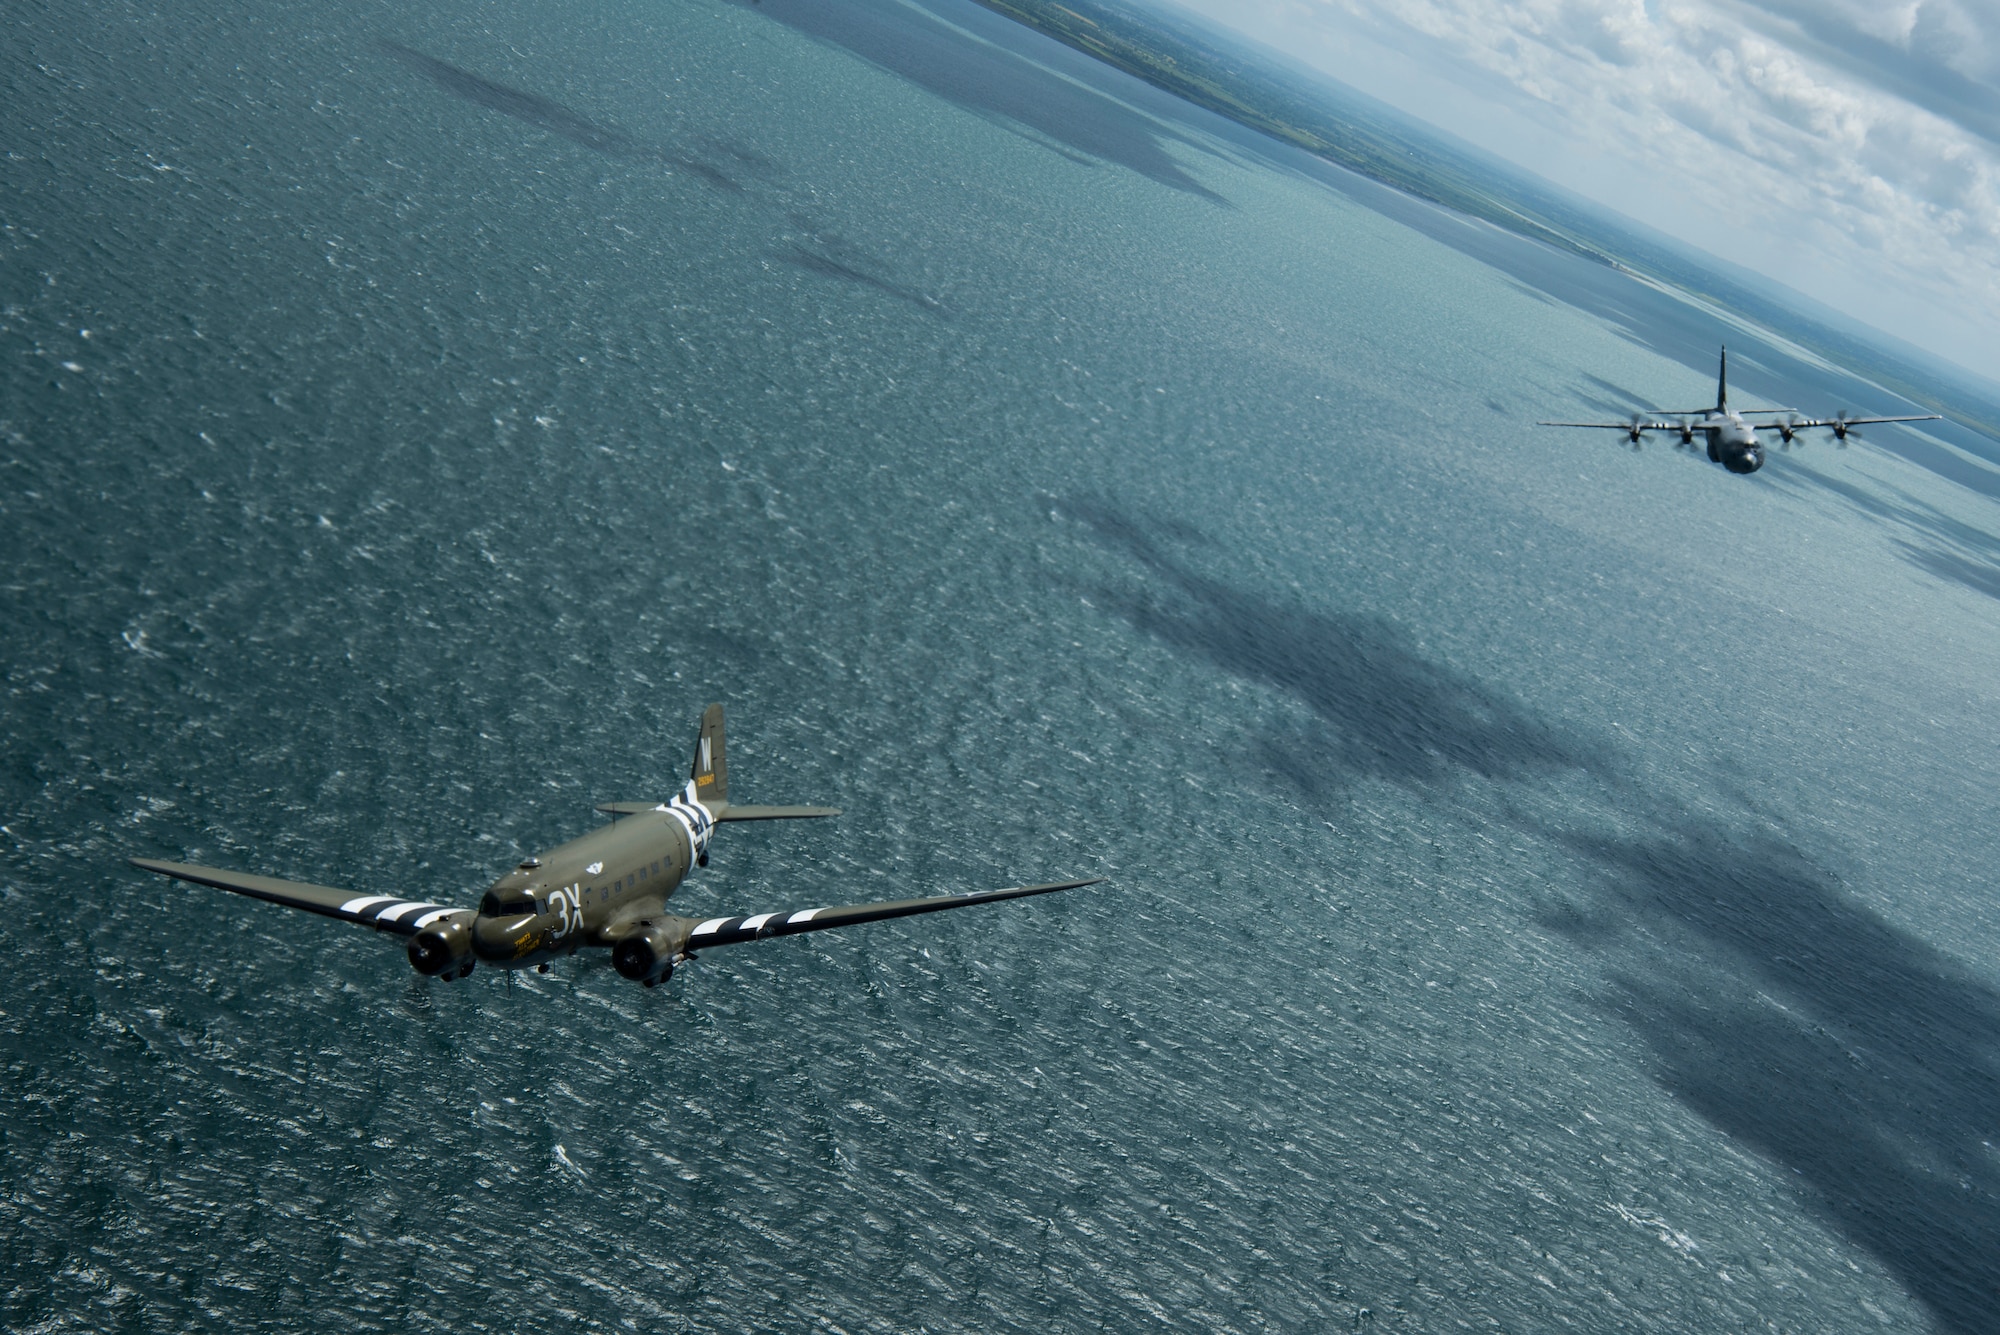 A Douglas C-47 Dakota, nicknamed “That’s All Brother”, flies with a U.S. Air Force C-130J Super Hercules, assigned to the 37th Airlift Squadron, Ramstein Air Base, Germany, over the English Channel, June 8, 2019. The 37th Troop Carrier Squadron, the legacy squadron to the 37th AS, wore the “W7” or “Whiskey 7” markings during Operation Neptune, June 6, 1944. “That’s All Brother” flew operations during the invasion of Normandy. (U.S. Air Force photo by Senior Airman Devin M. Rumbaugh)